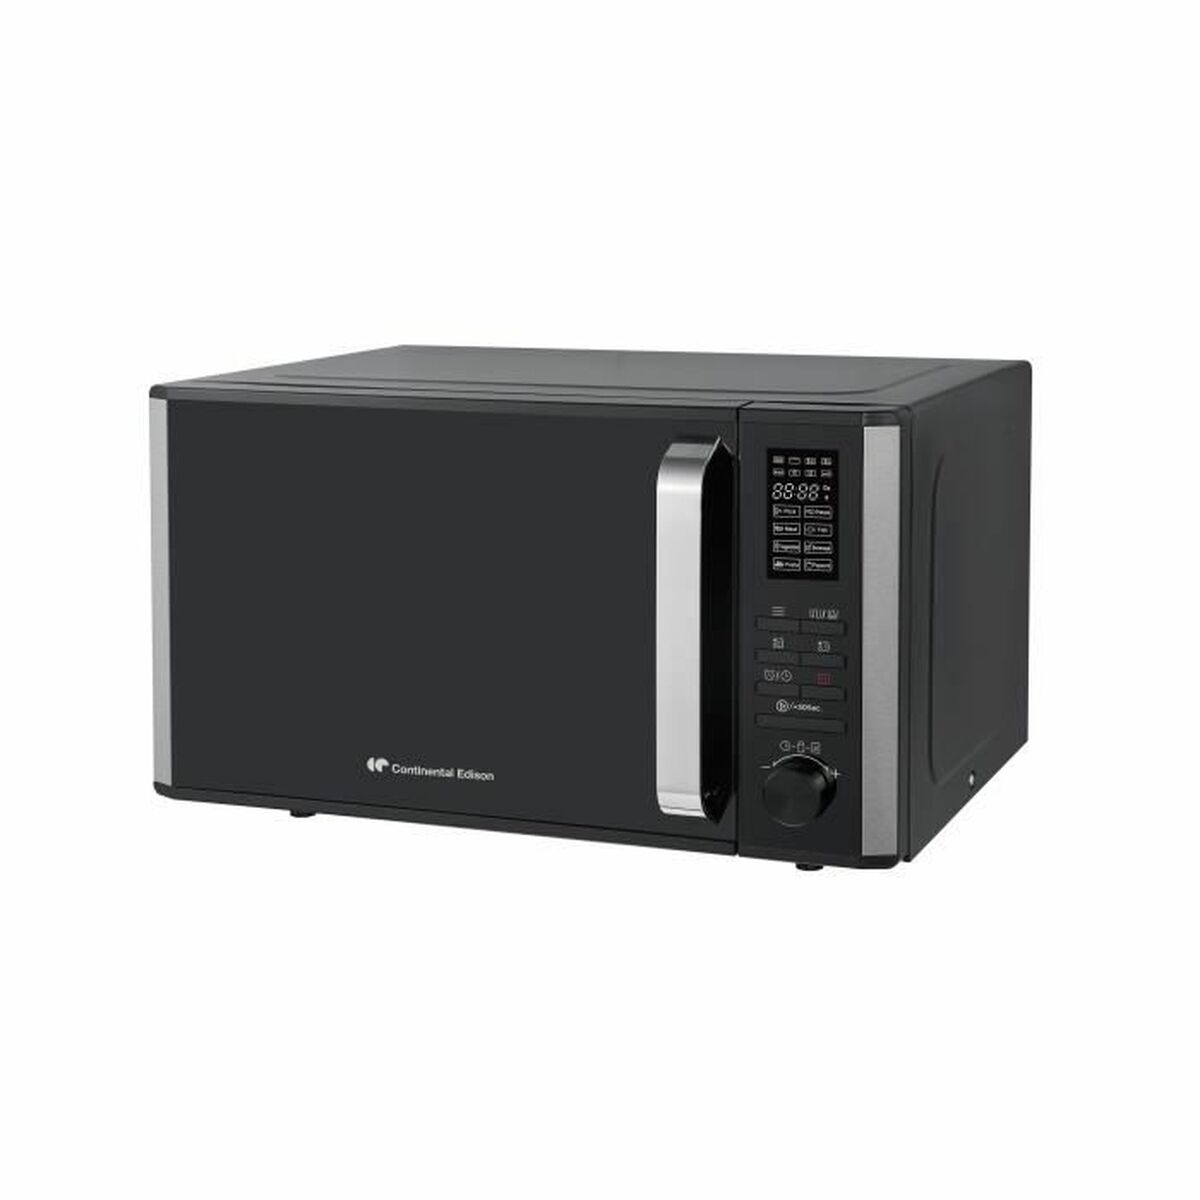 Magnetron met Grill Continental Edison MO28GB 28 L 1450 W